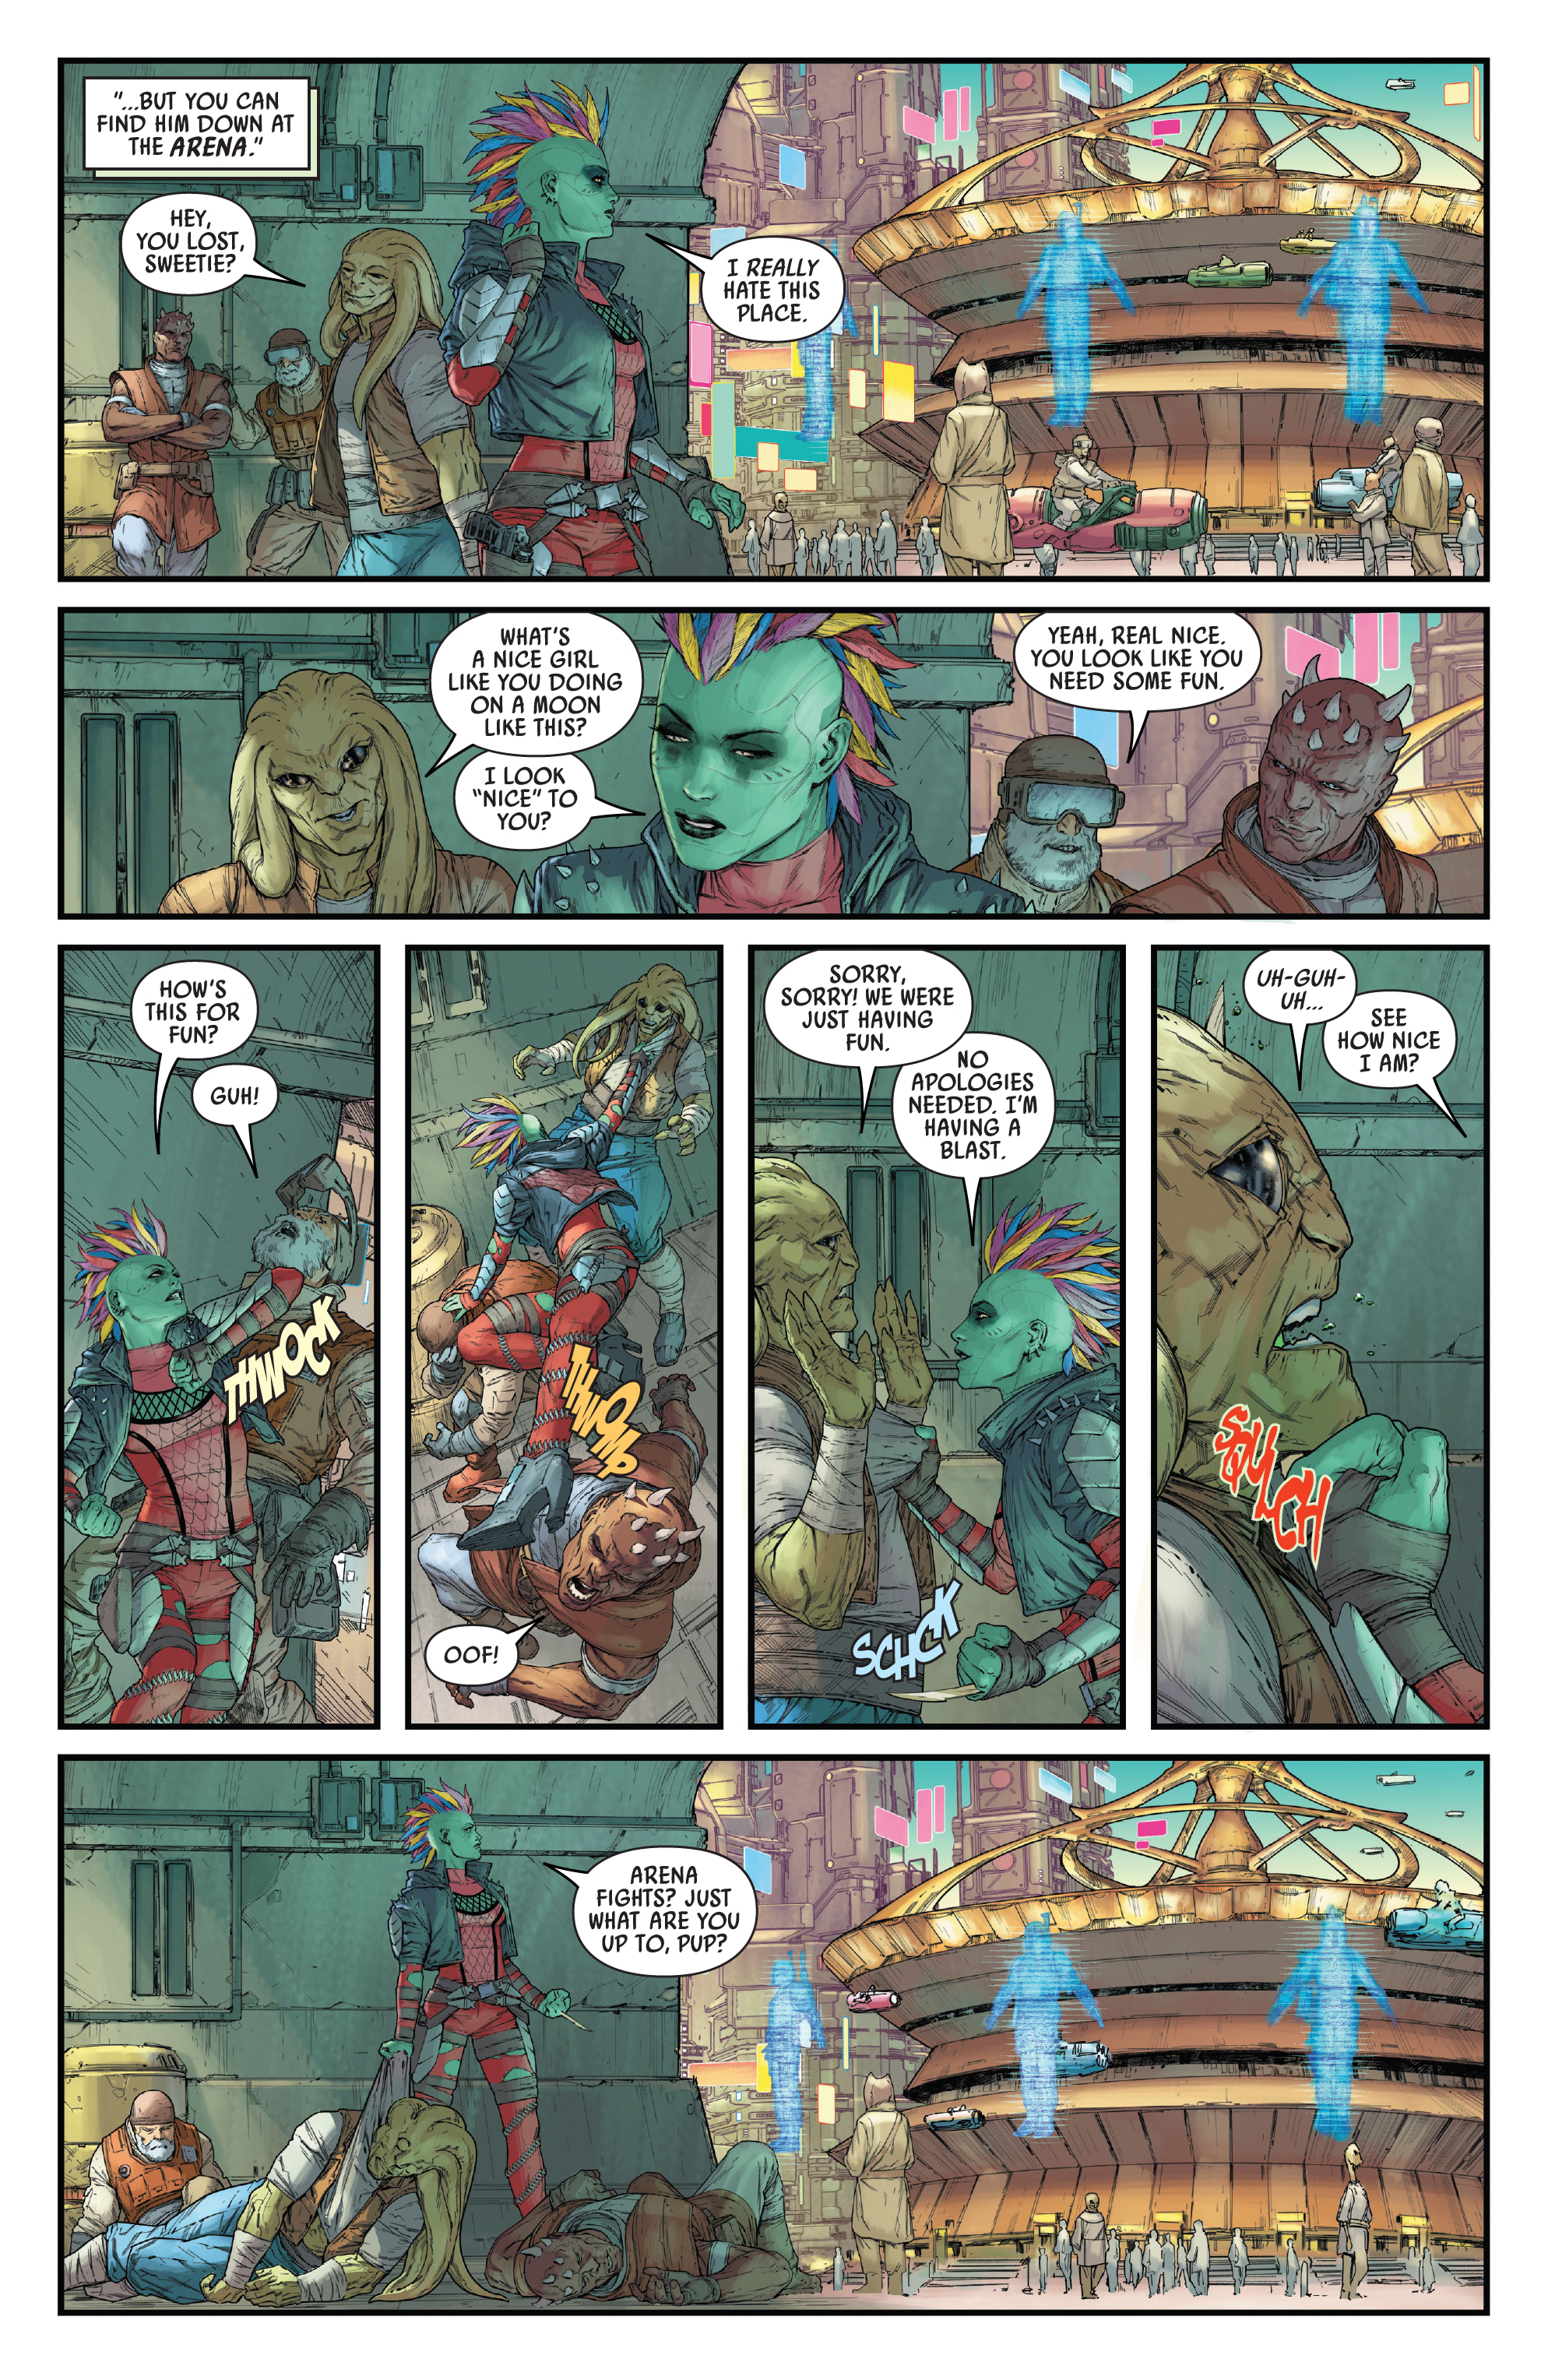 Star Wars War Of The Bounty Hunters Jabba The Hutt 2021 Chapter 1 Page 11 7740